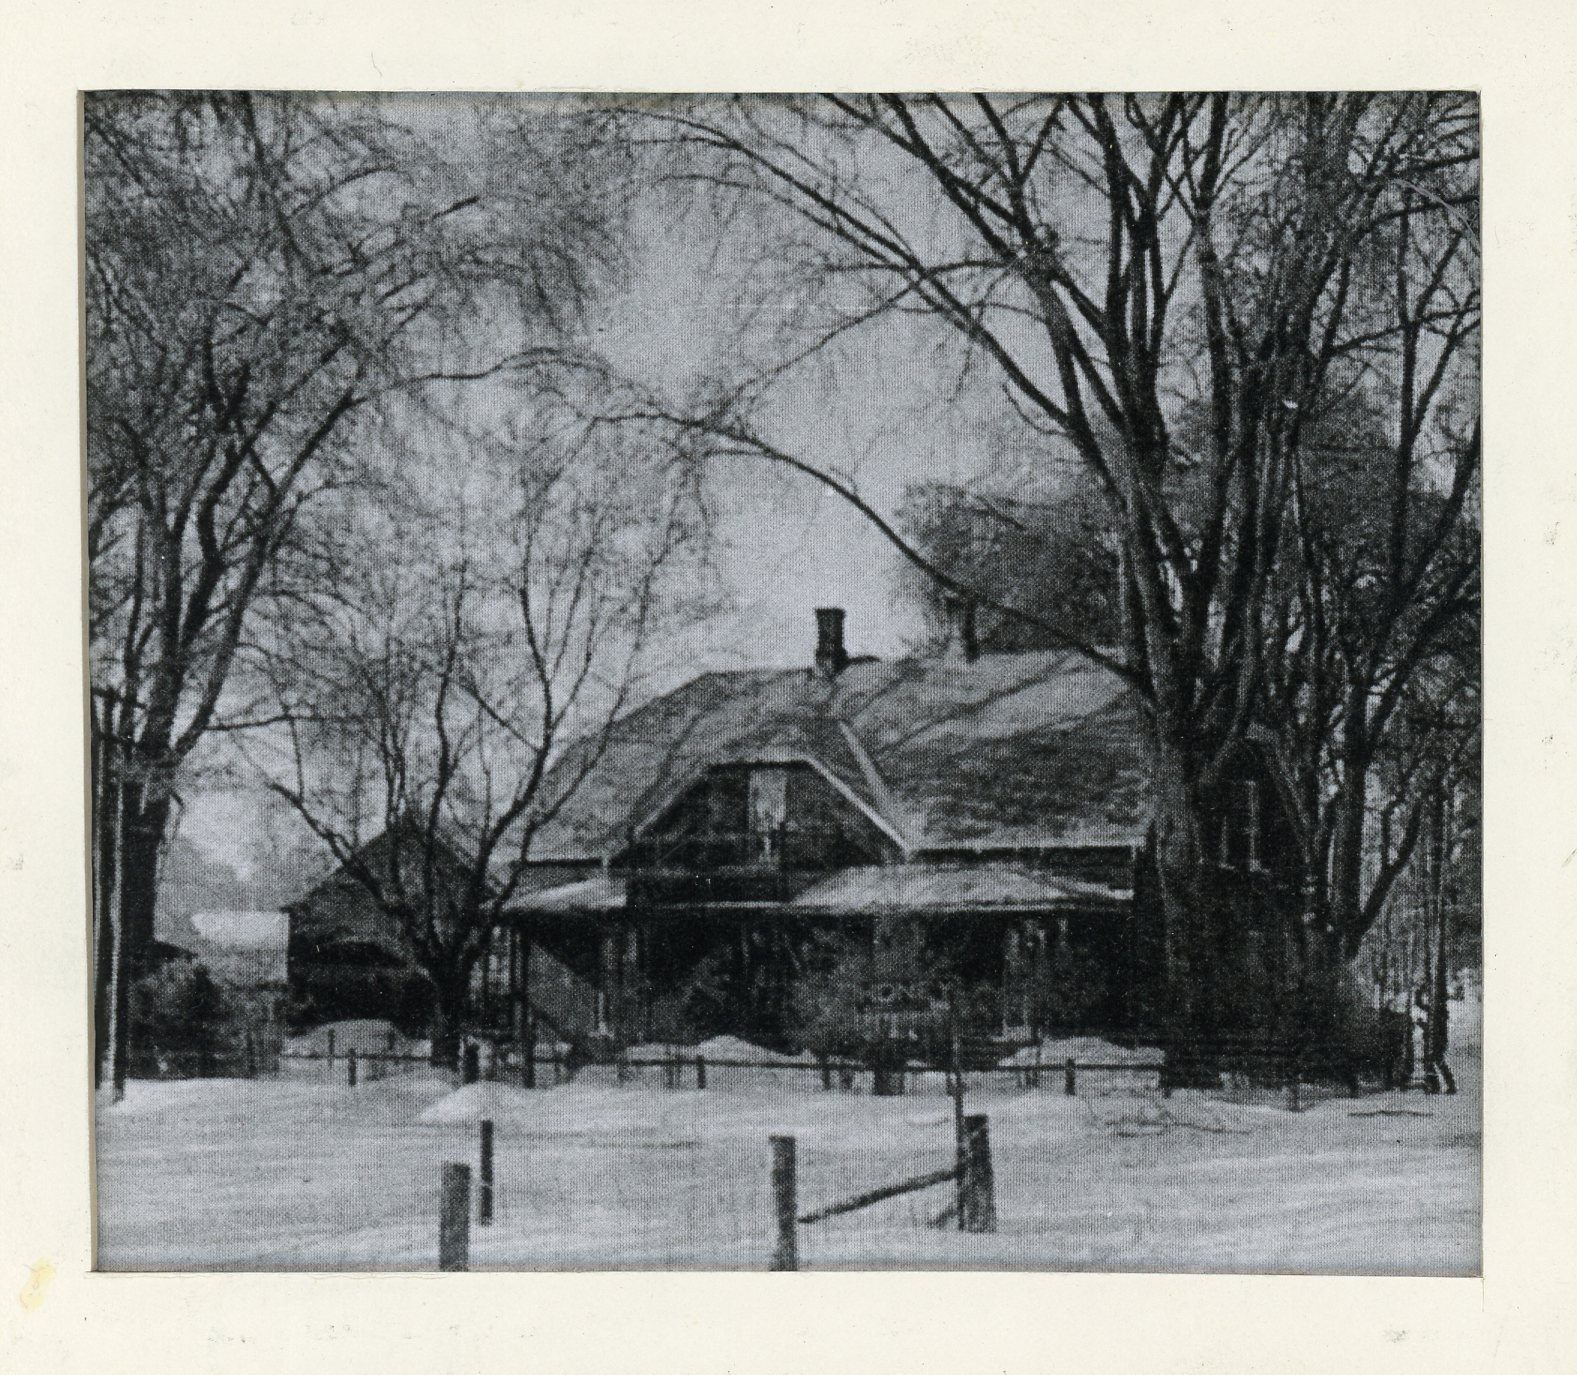 Photograph of Elmbank, Maude Abbott’s home, in winter, black and white. It is a two-storey brick house with a gable roof, two chimneys and a gallery on both floors. There is a wooden fence and a sign marked “HONEY” in front of the house, and many trees on the property.